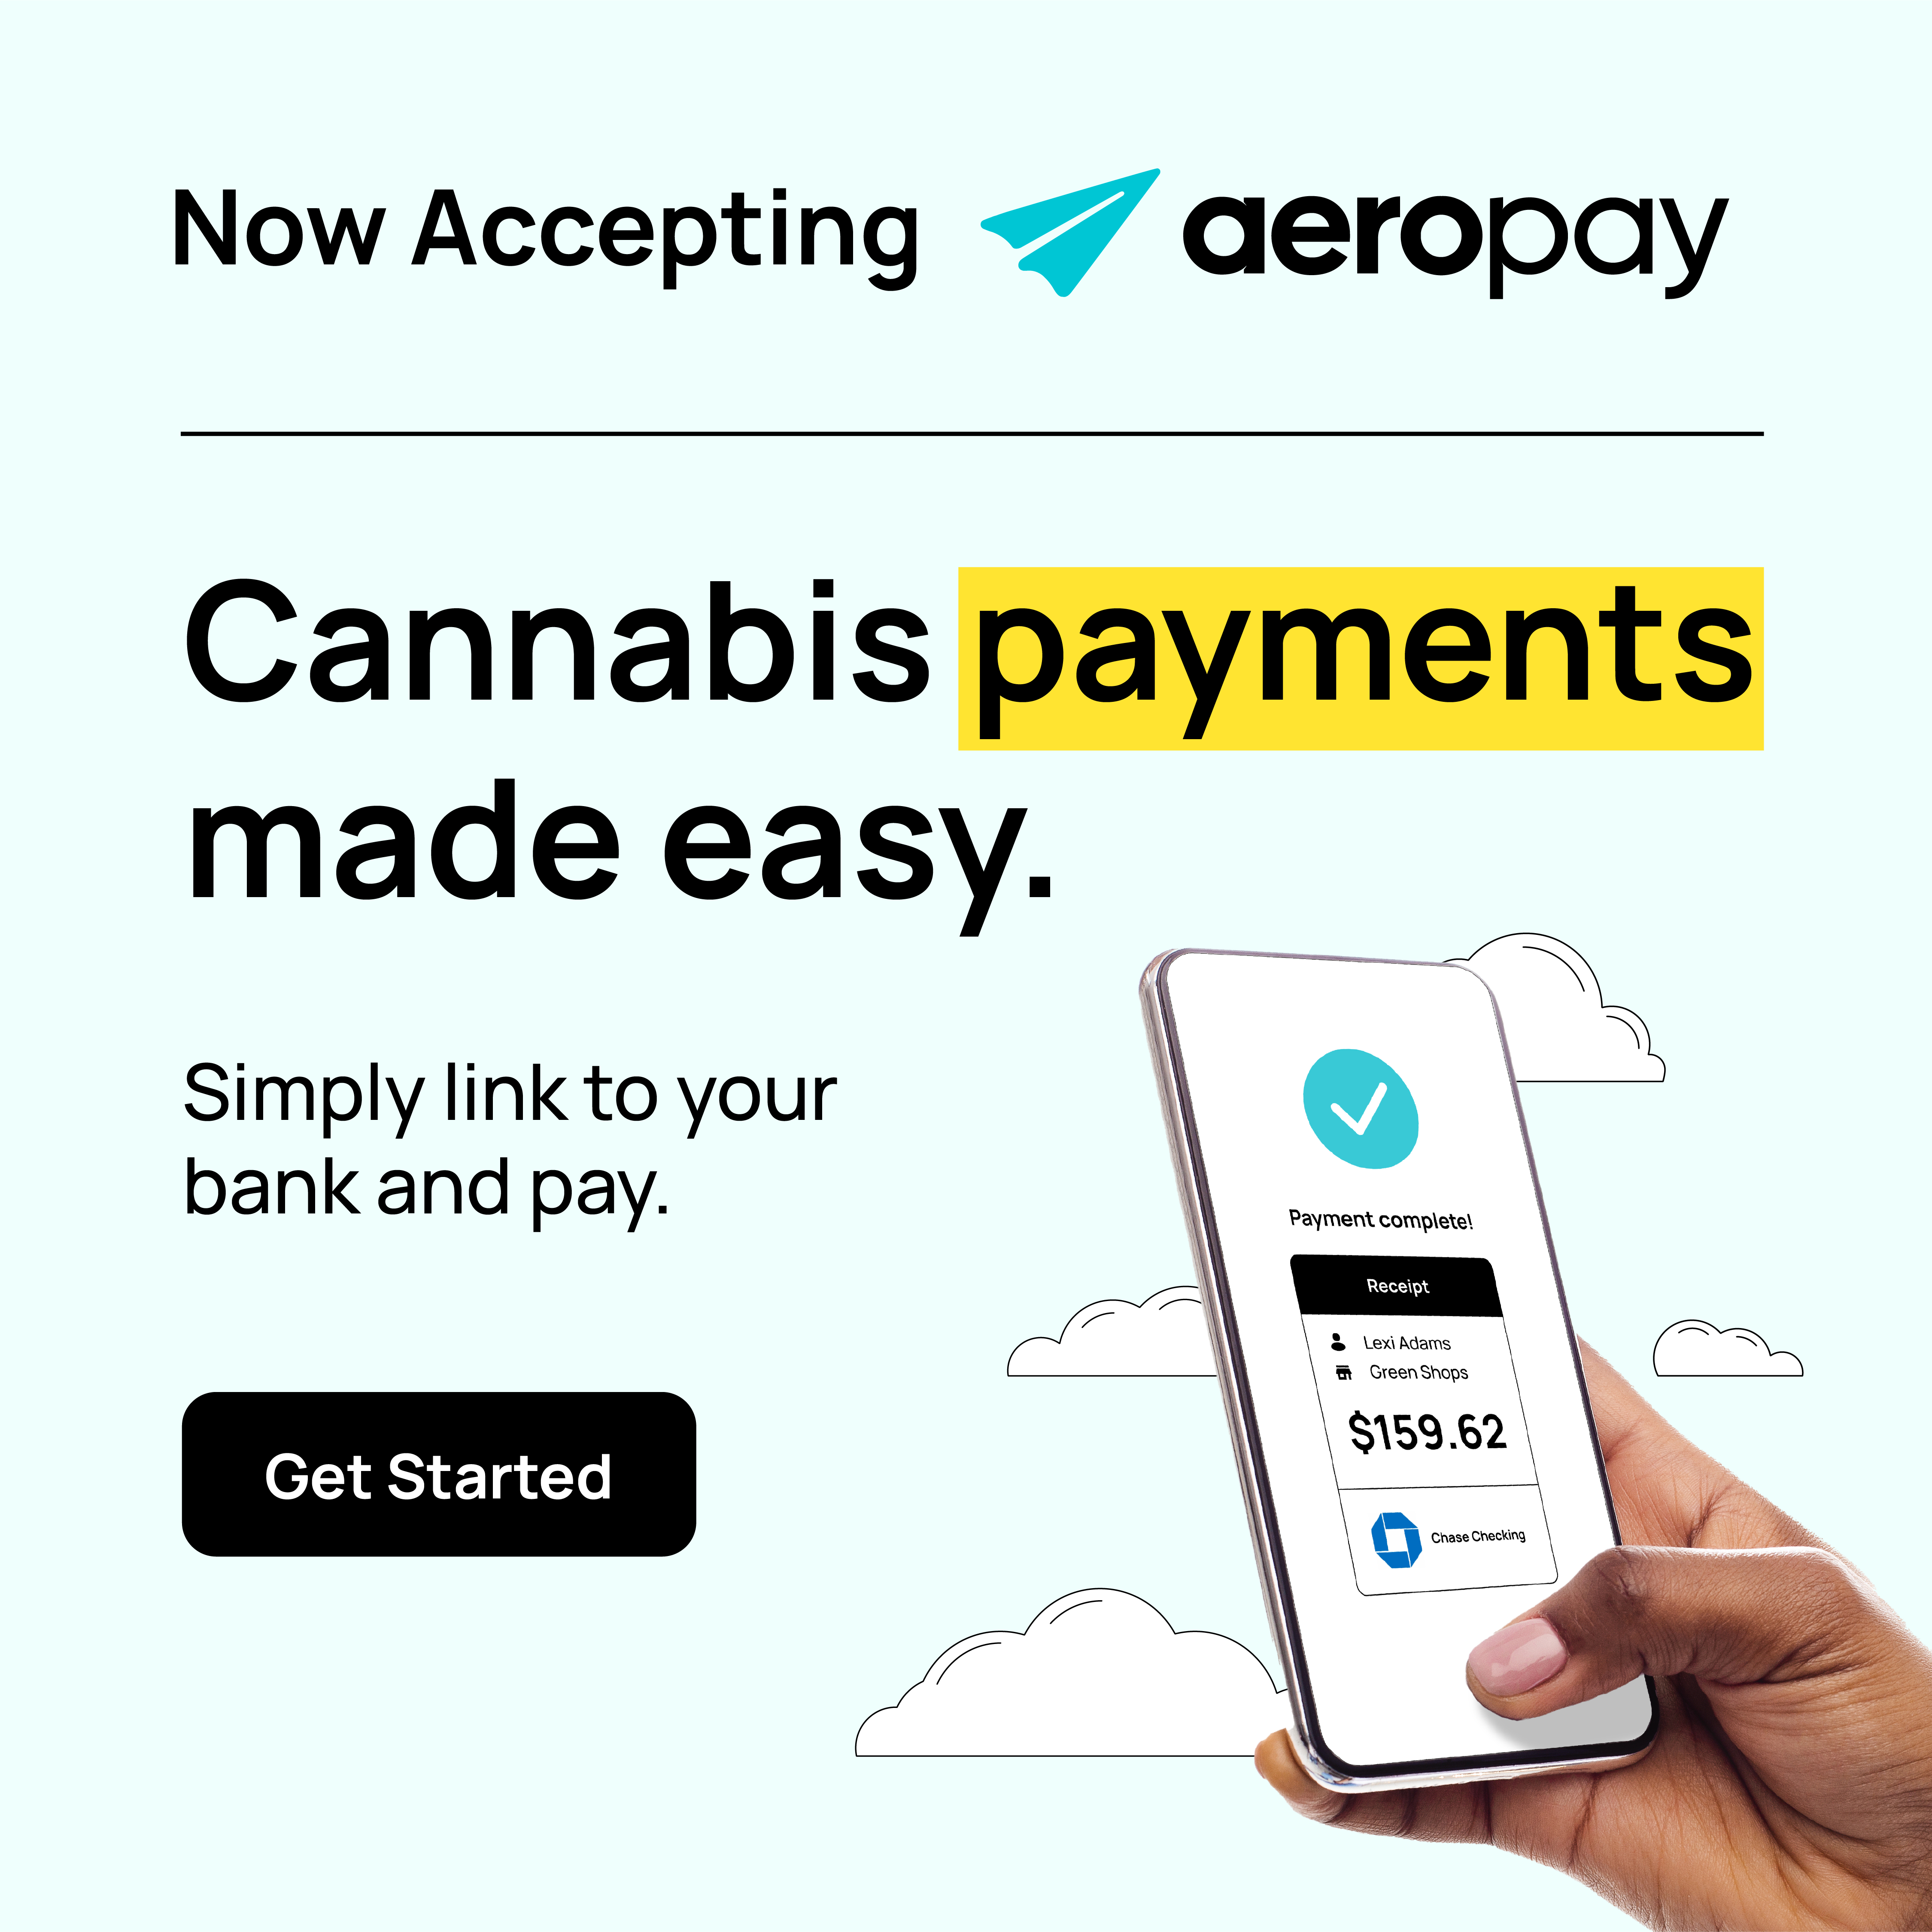 Aeropay Partners with HighHello to Offer Digital Payments for New Monthly Cannabis Subscription Club